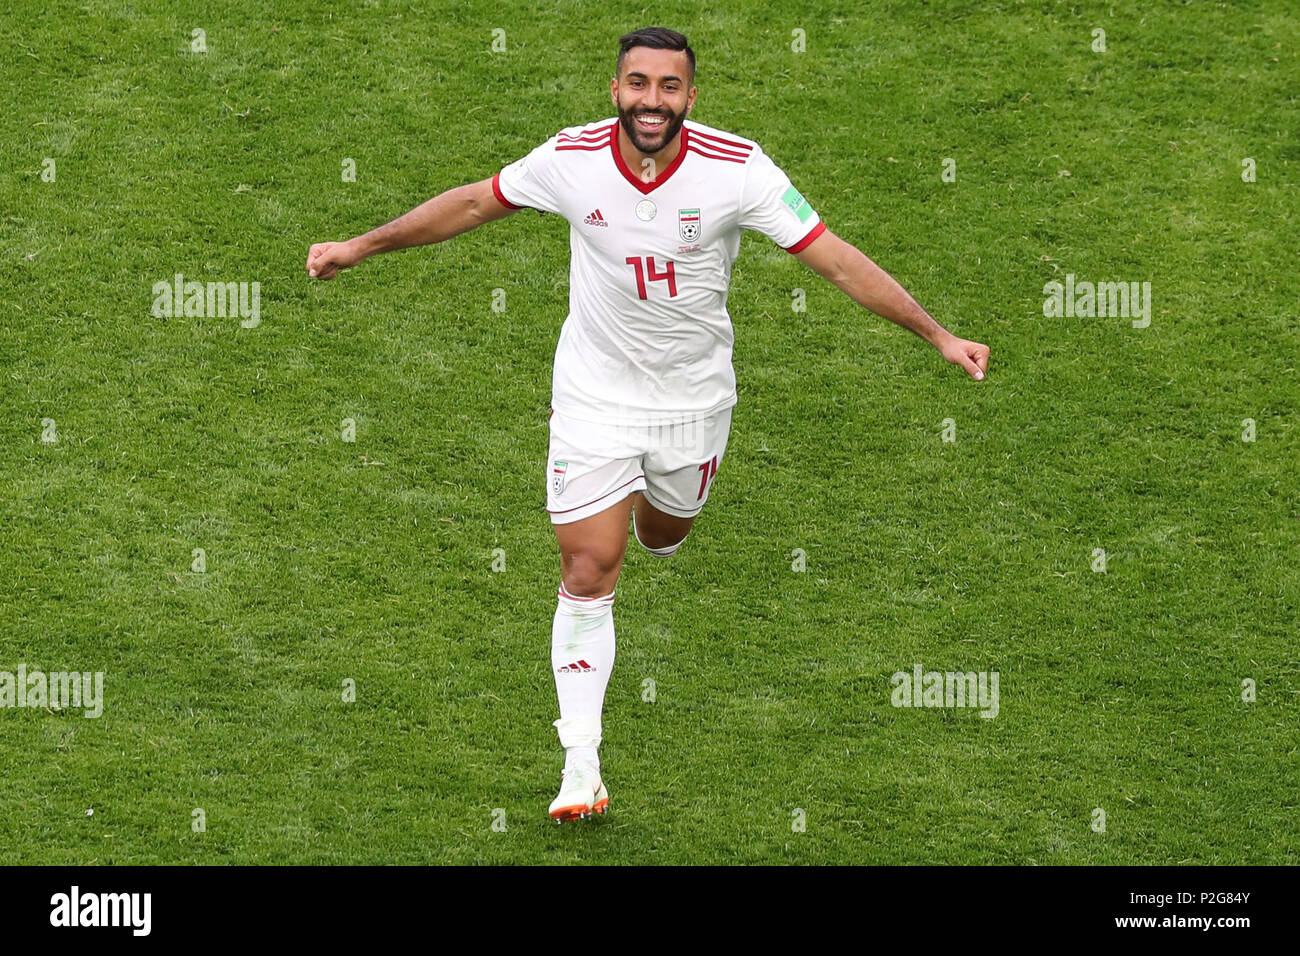 Saint Petersburg, Russia. 15th June, 2018. Iran's Saman Ghoddos celebrates his team win after the final whistle of the FIFA World Cup 2018 Group B soccer match between Iran and Morocco at the Saint Petersburg Stadium, in Saint Petersburg, Russia, 15 June 2018. Credit: Saeid Zareian/dpa/Alamy Live News Stock Photo